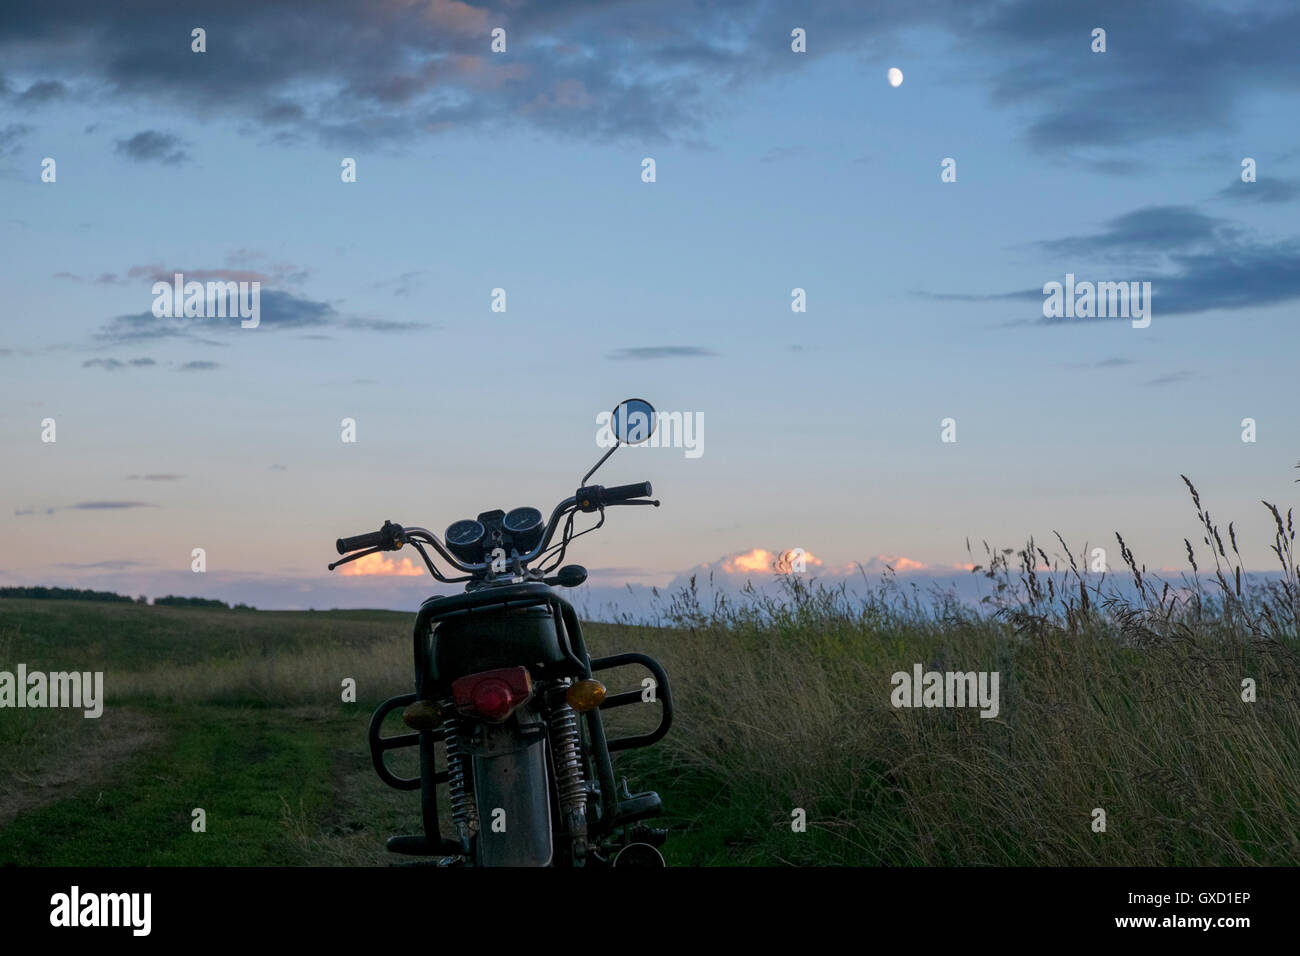 Motorbike parked in rural landscape, Ural, Russia Stock Photo